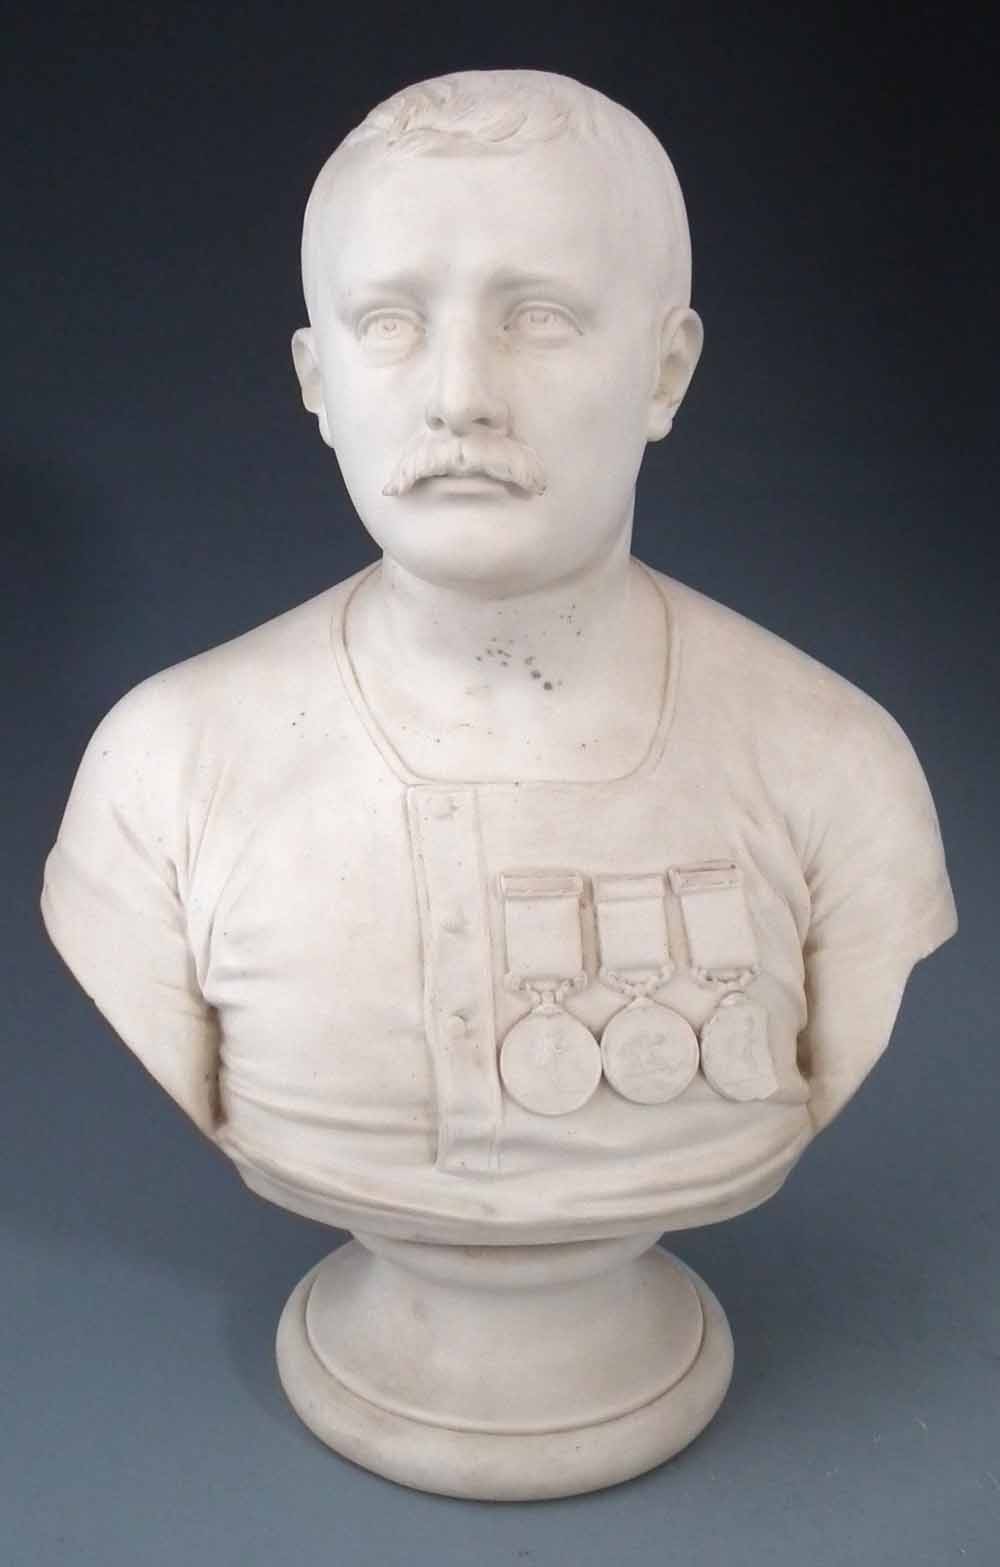 Staffordshire Parian bust of Captain Mathew Webb circa 1875   published by J.S. Crapper and C.